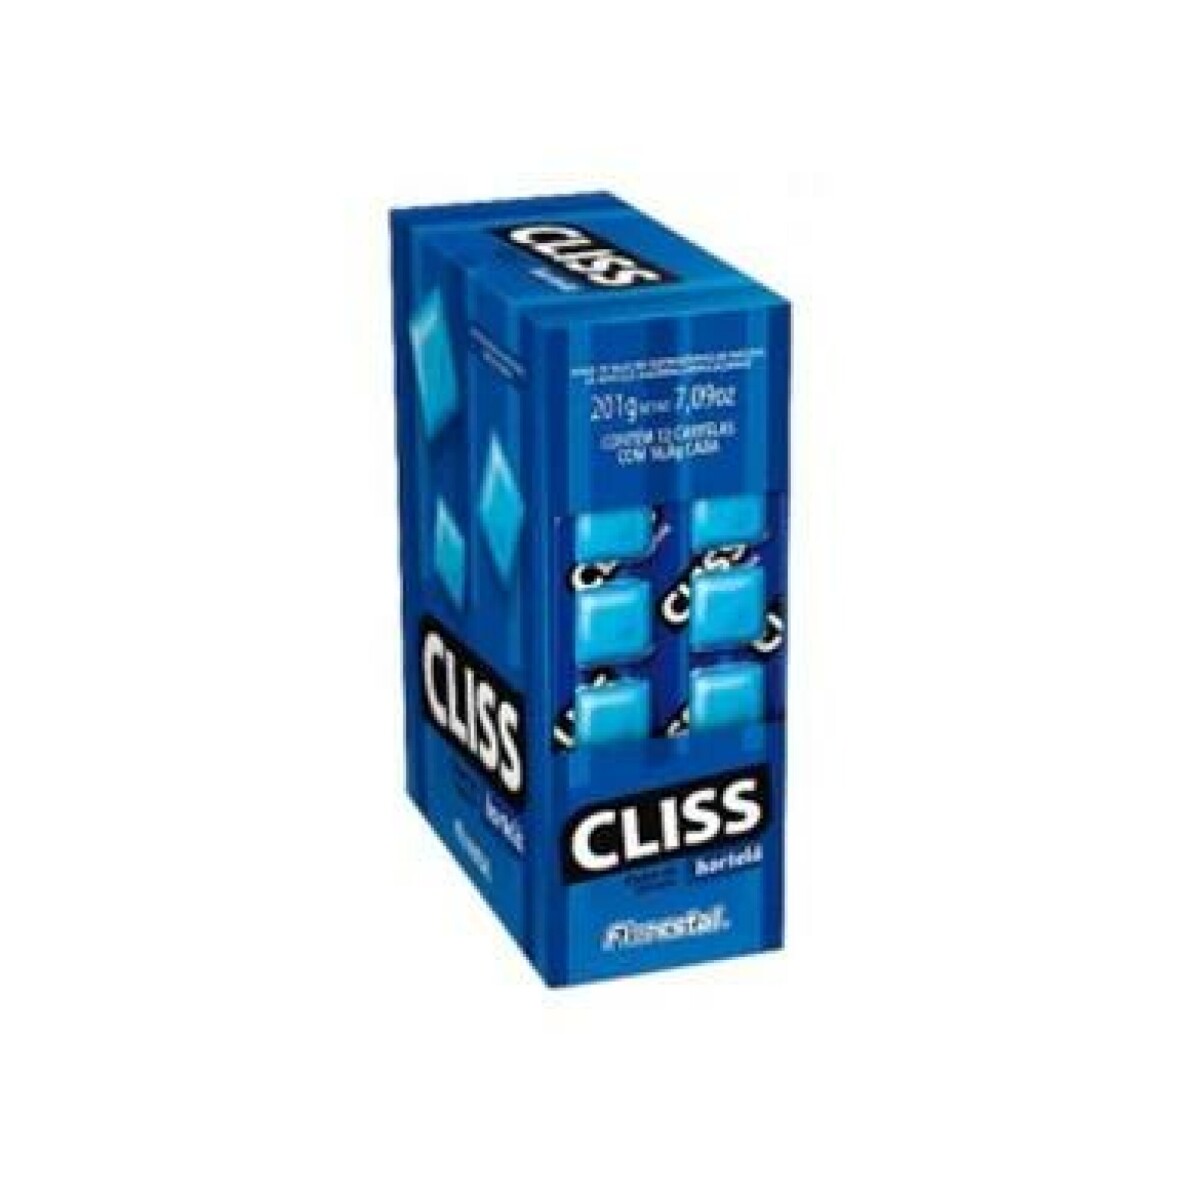 Chicle Cliss x12 - Hortela 